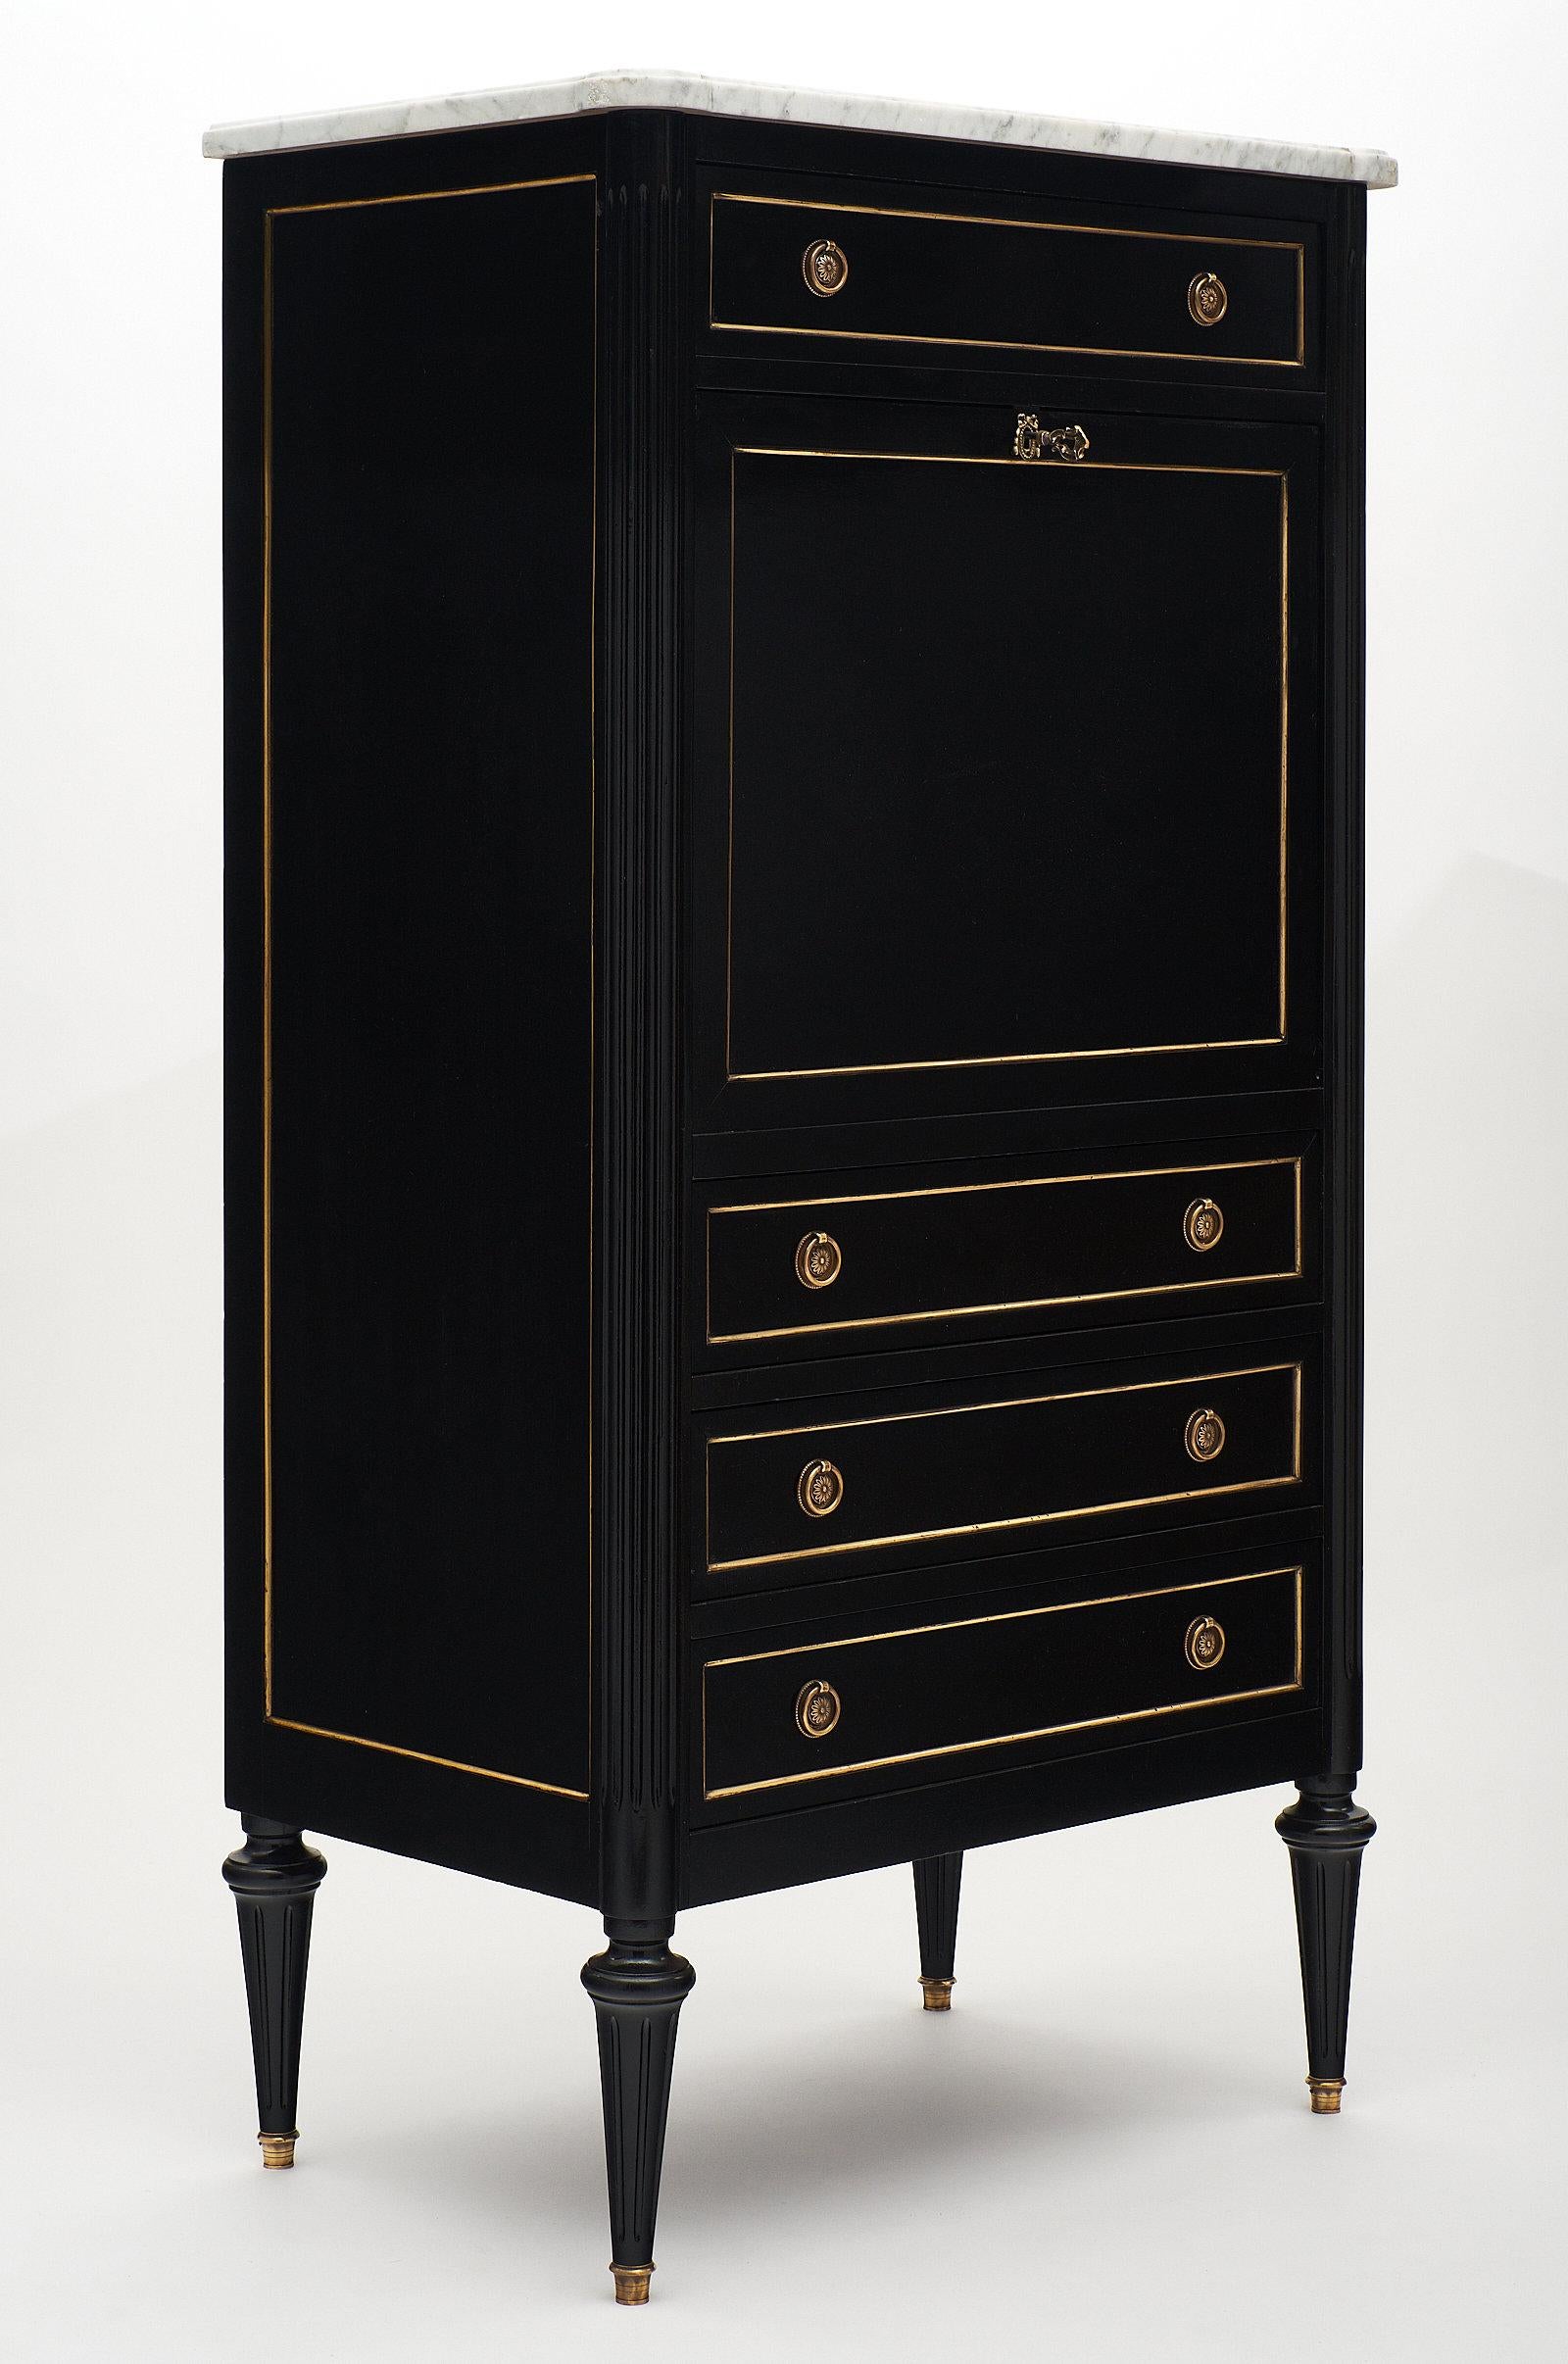 Ebonized Louis XVI style secrétaire - A very well proportioned “secretaire a abattant” made of solid mahogany and finished in a lustrous ebonized tone. This piece is topped with a pristine Carrara marble. The high quality is also visible in the